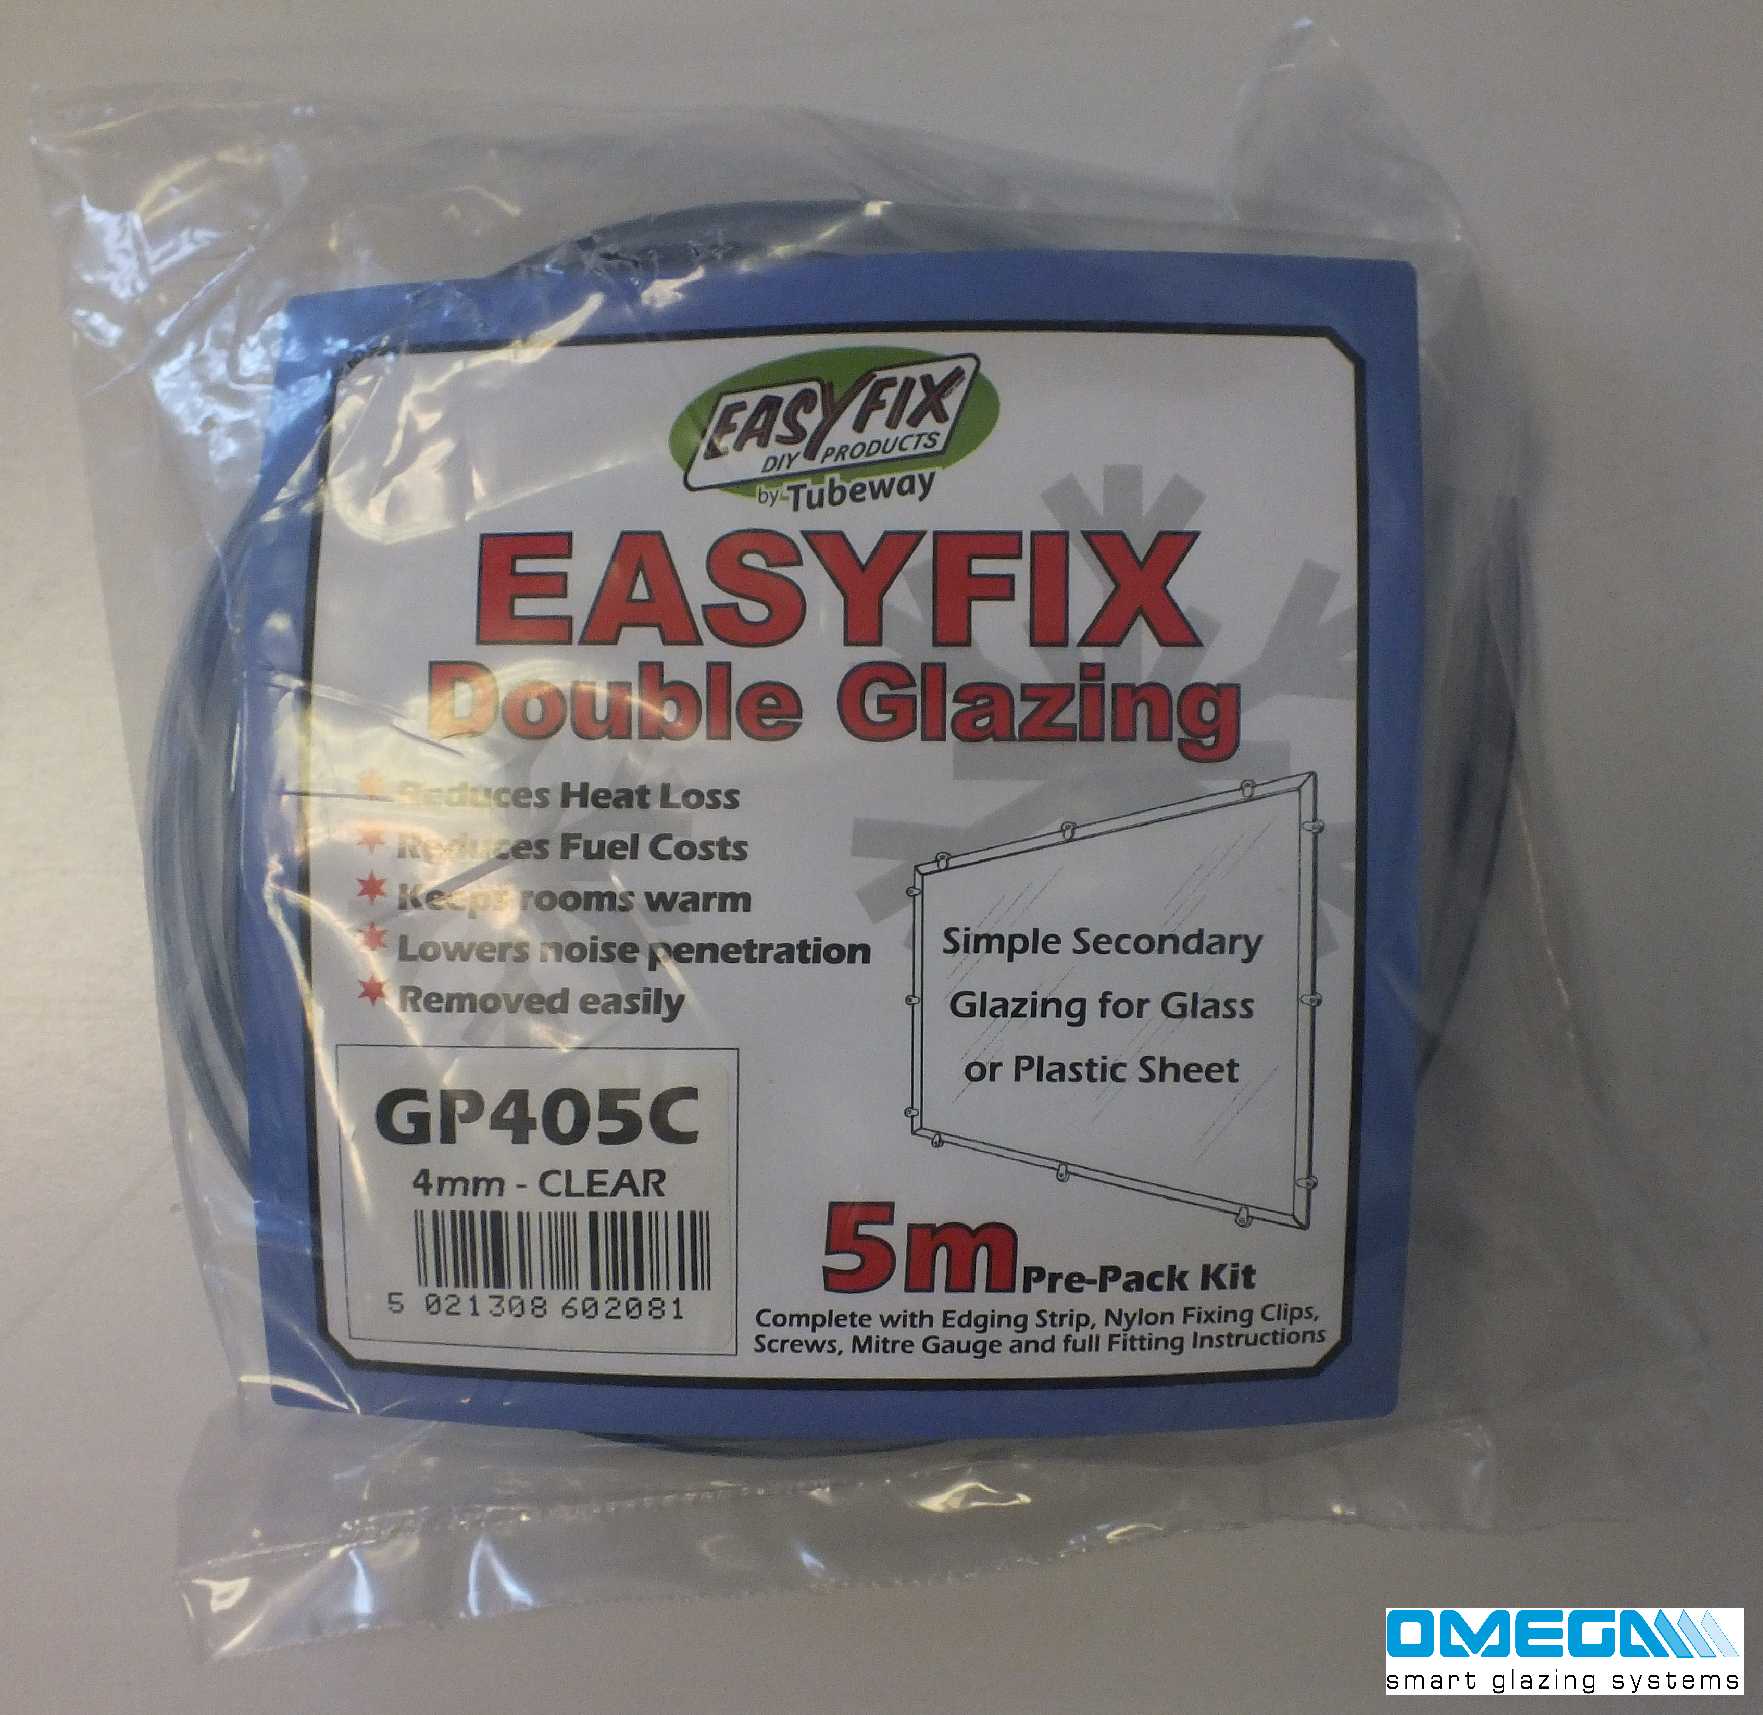 Buy Easyfix Clipglaze Edging Kit - 5m roll of edging for 2mm Glazing Thickness, Clear online today